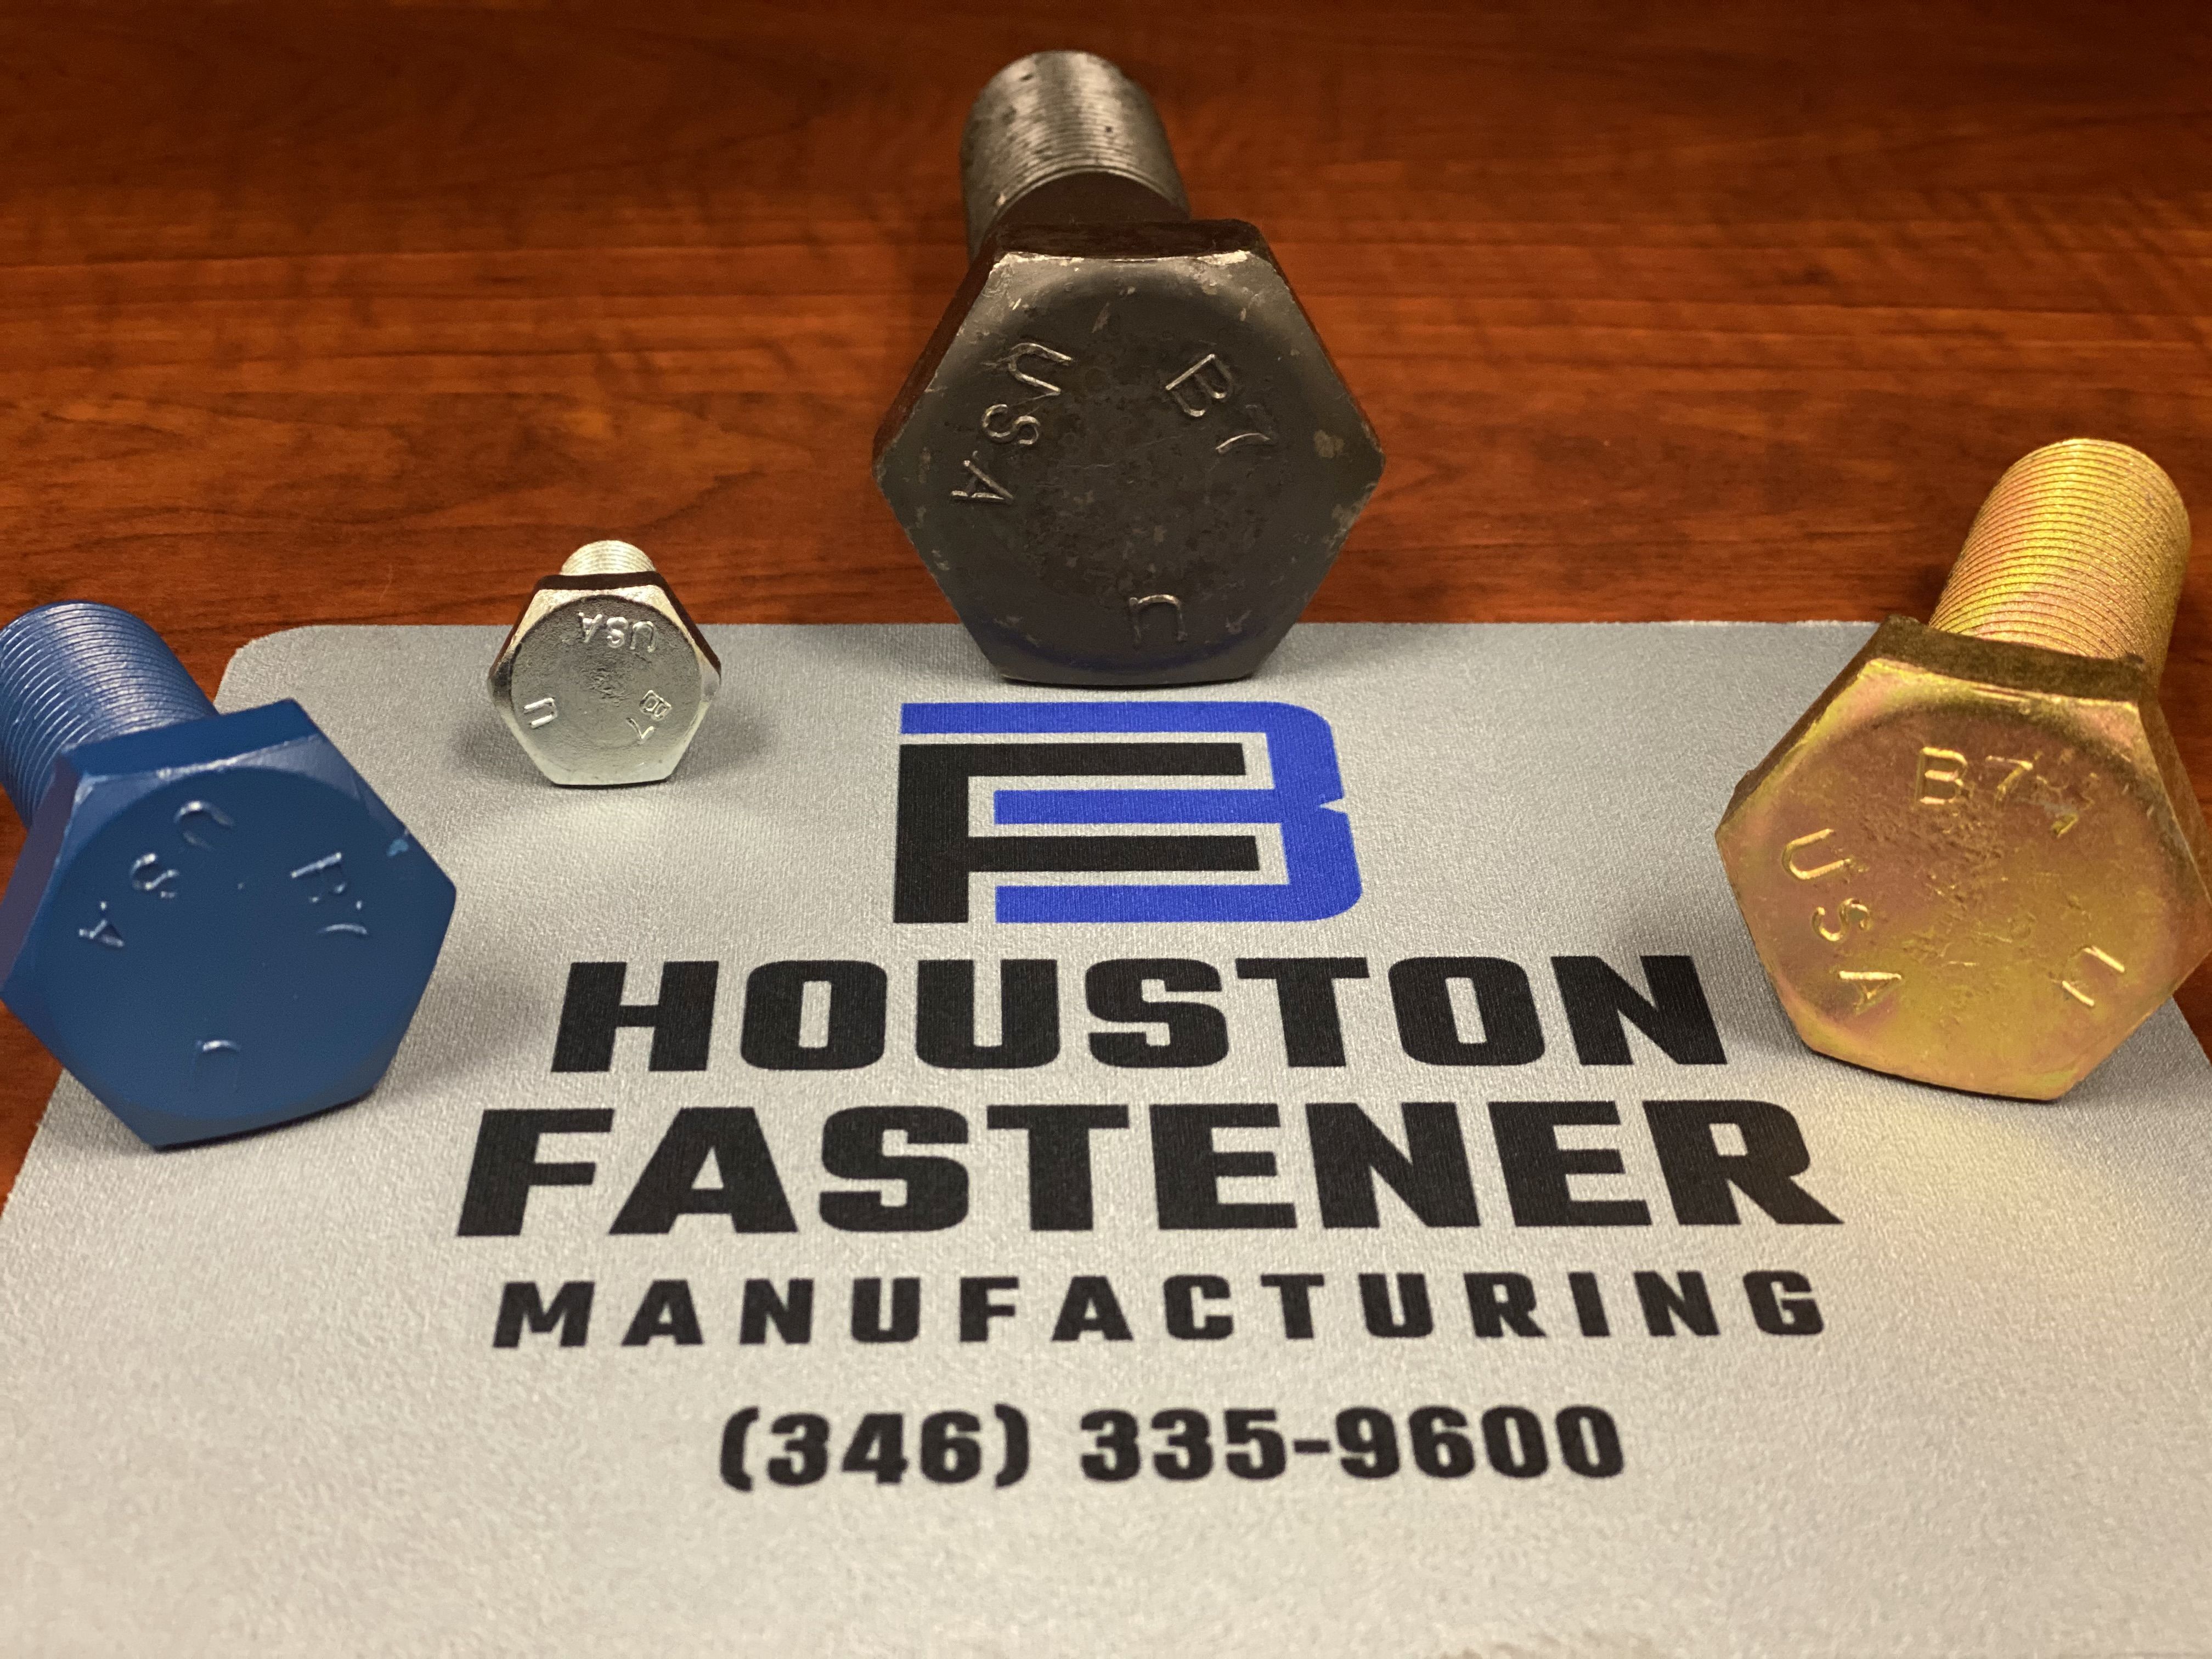 Houston Fastener Manufacturing: Serving the Oil and Gas Industry